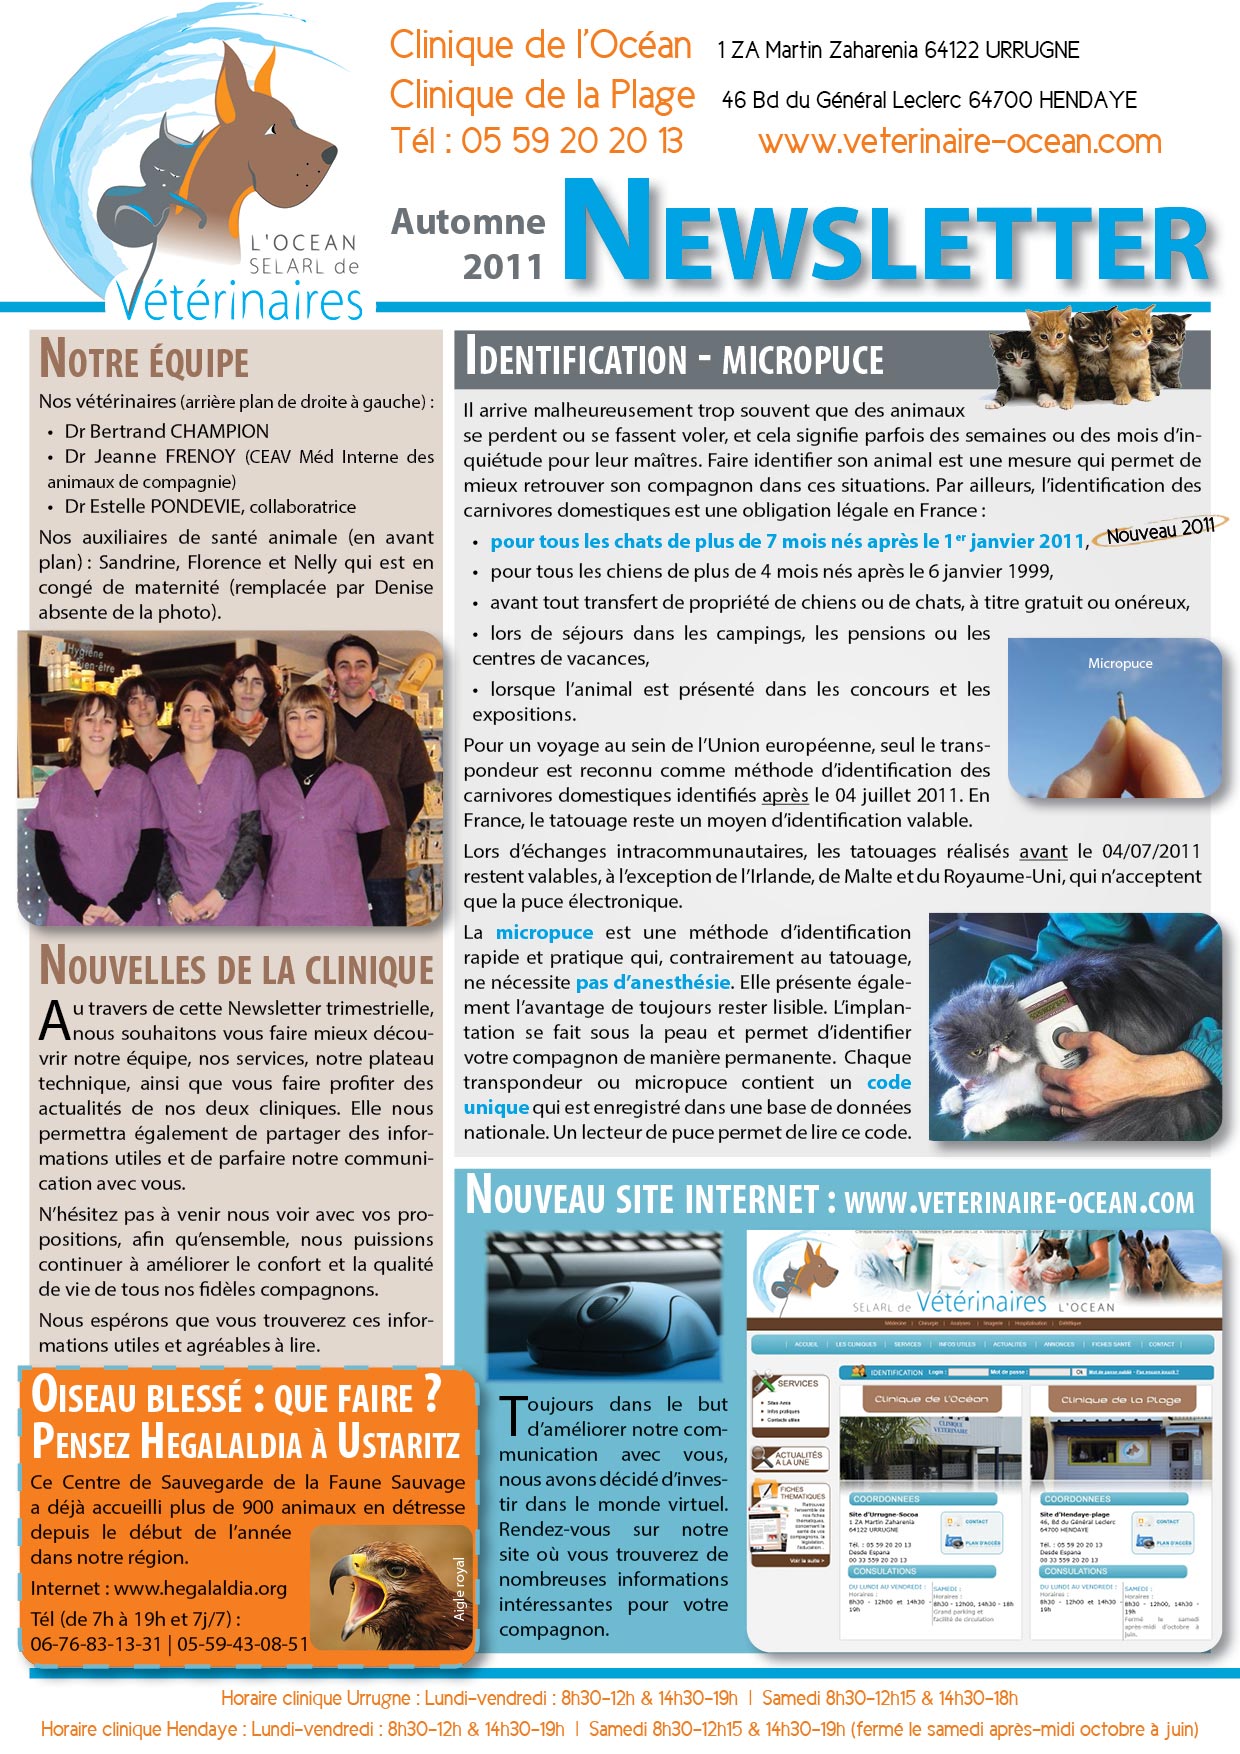 Newsletter - Automne 2011 page 2